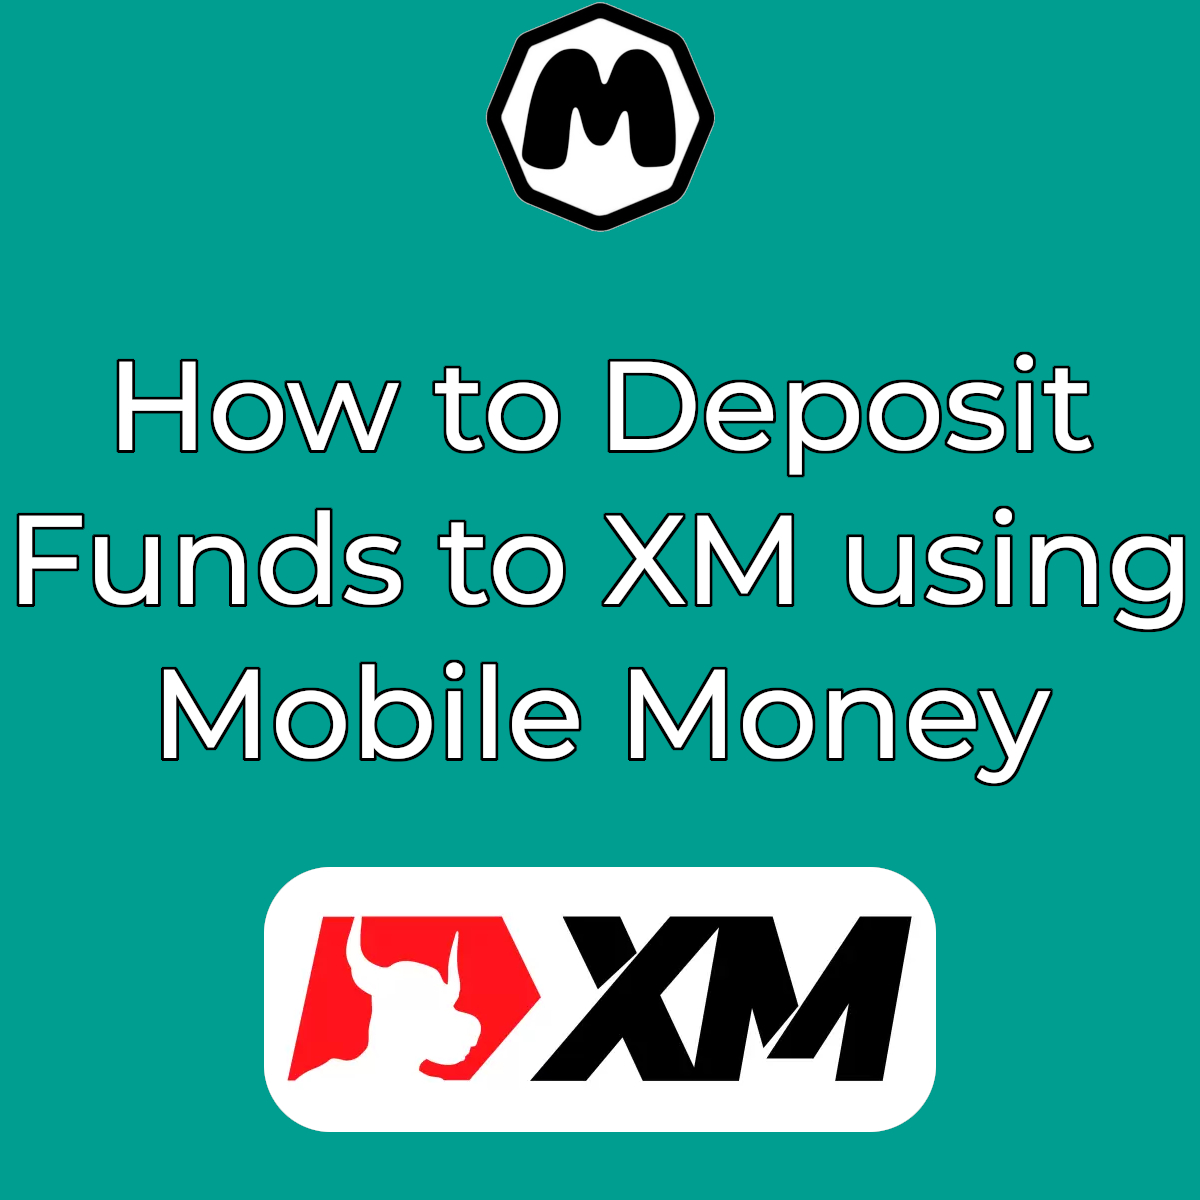 How to Deposit Funds to XM using Mobile Money